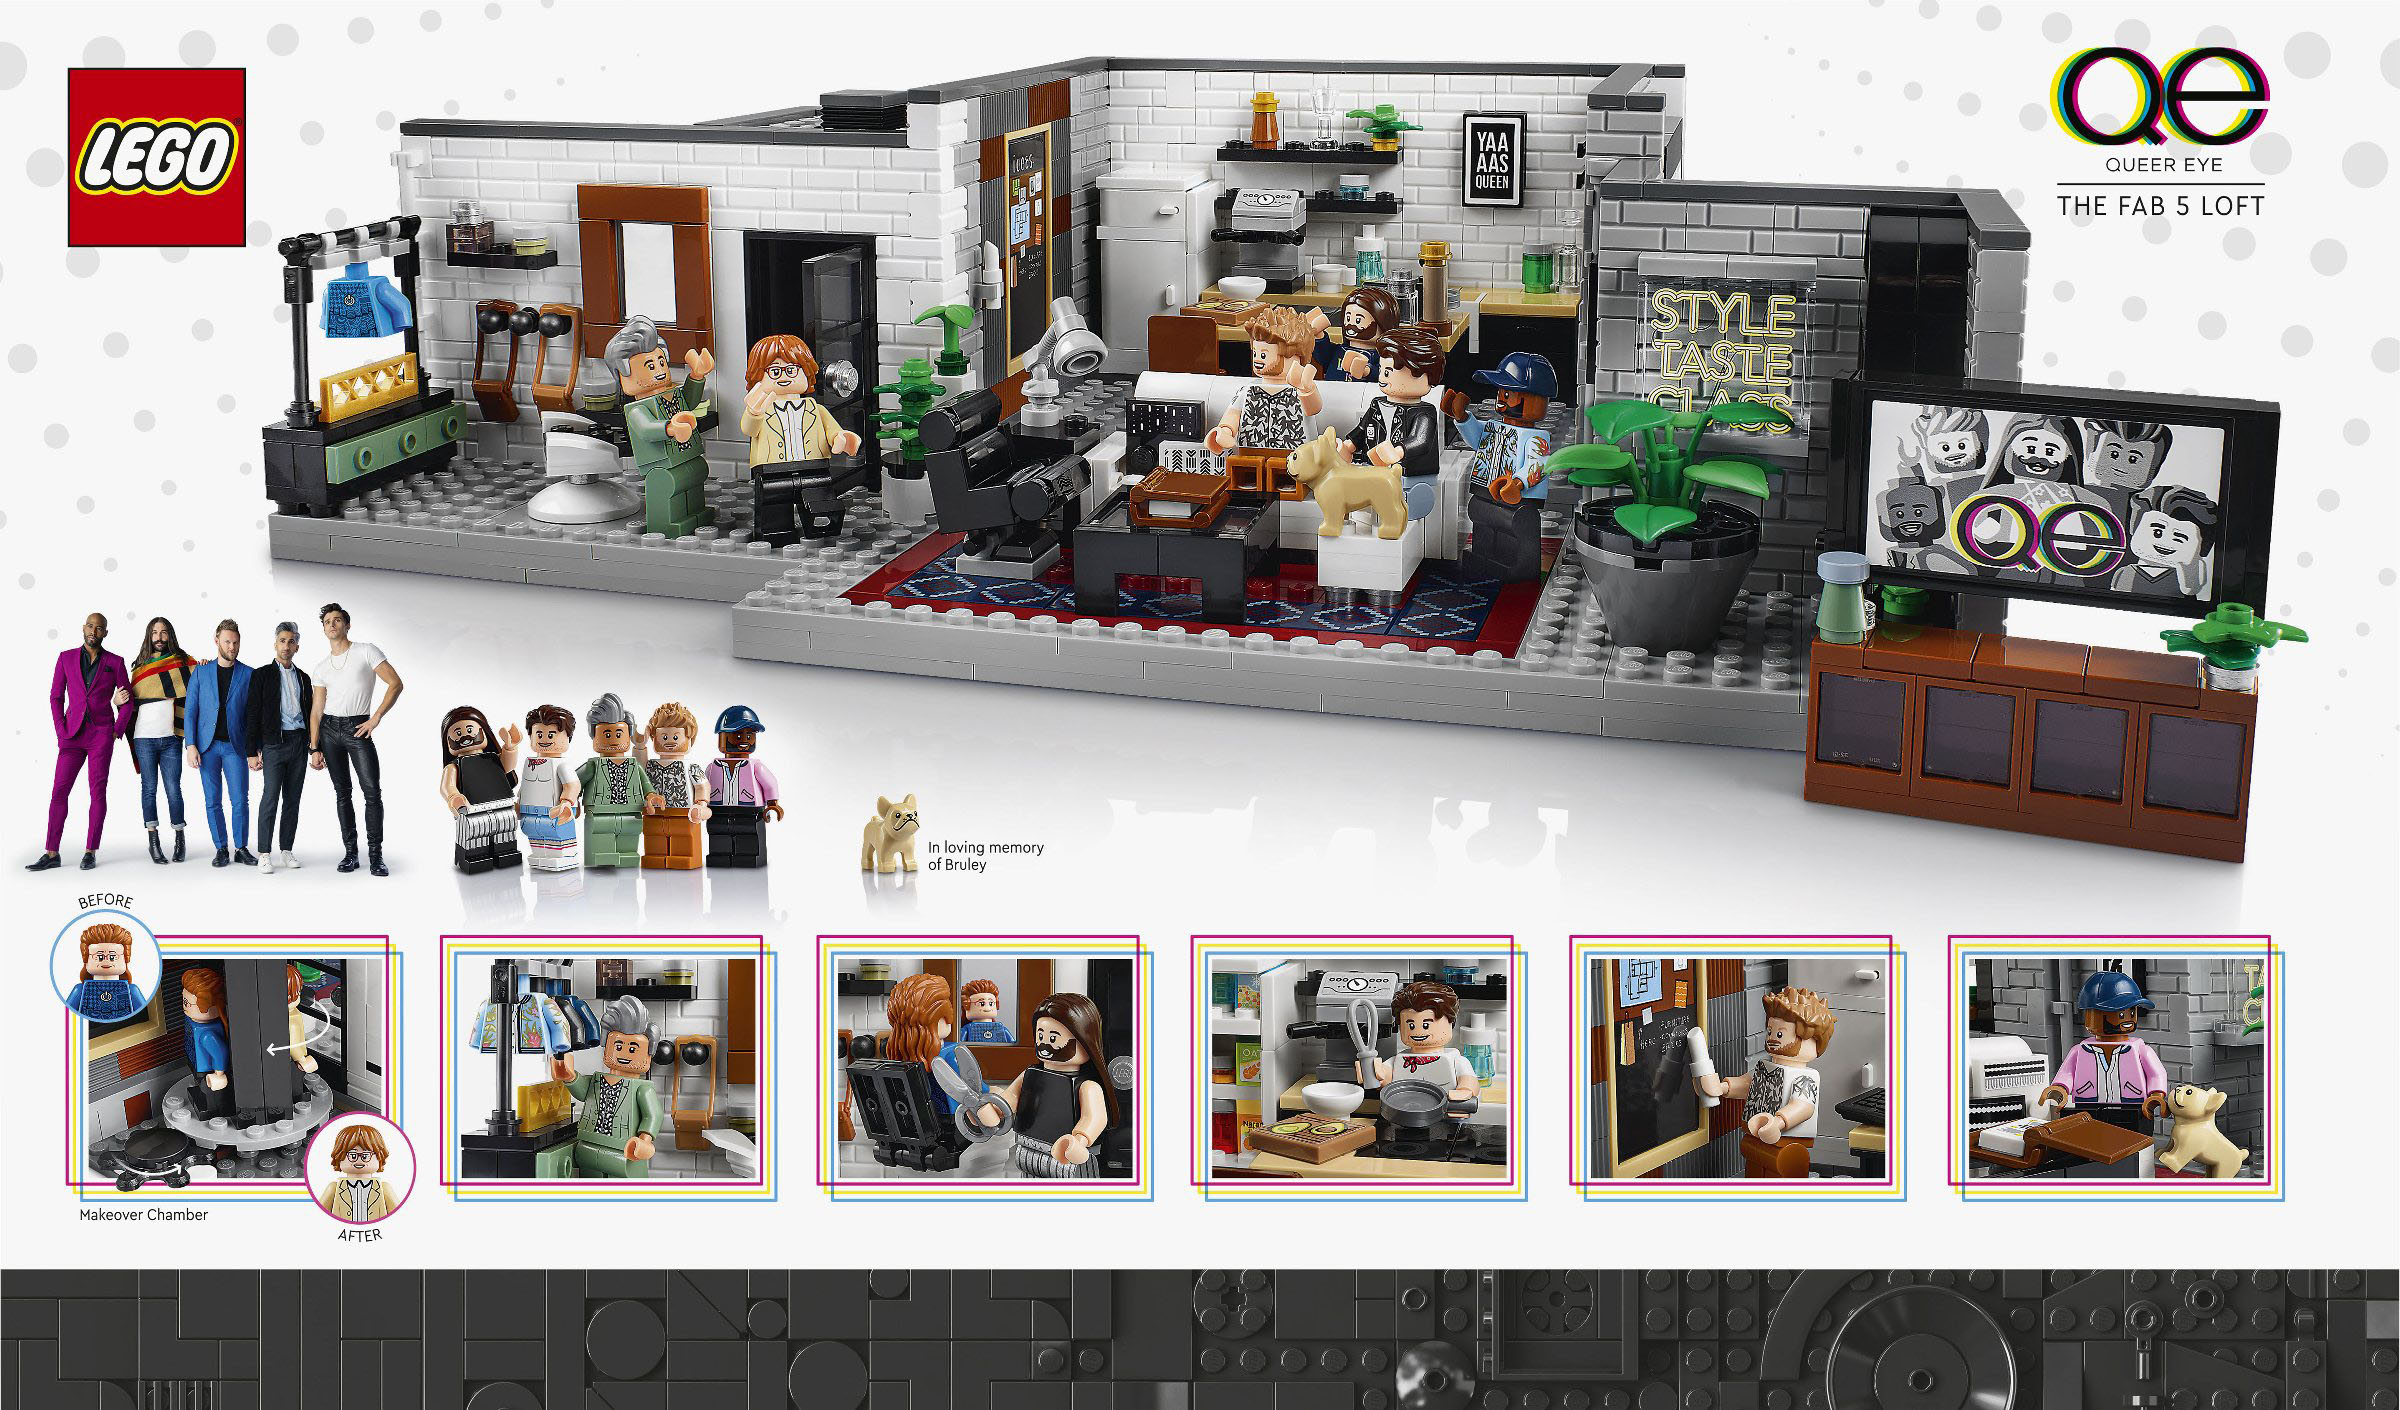 Only 45.00 usd for Retired Set 10291 Queer Eye - The Fab 5 Loft